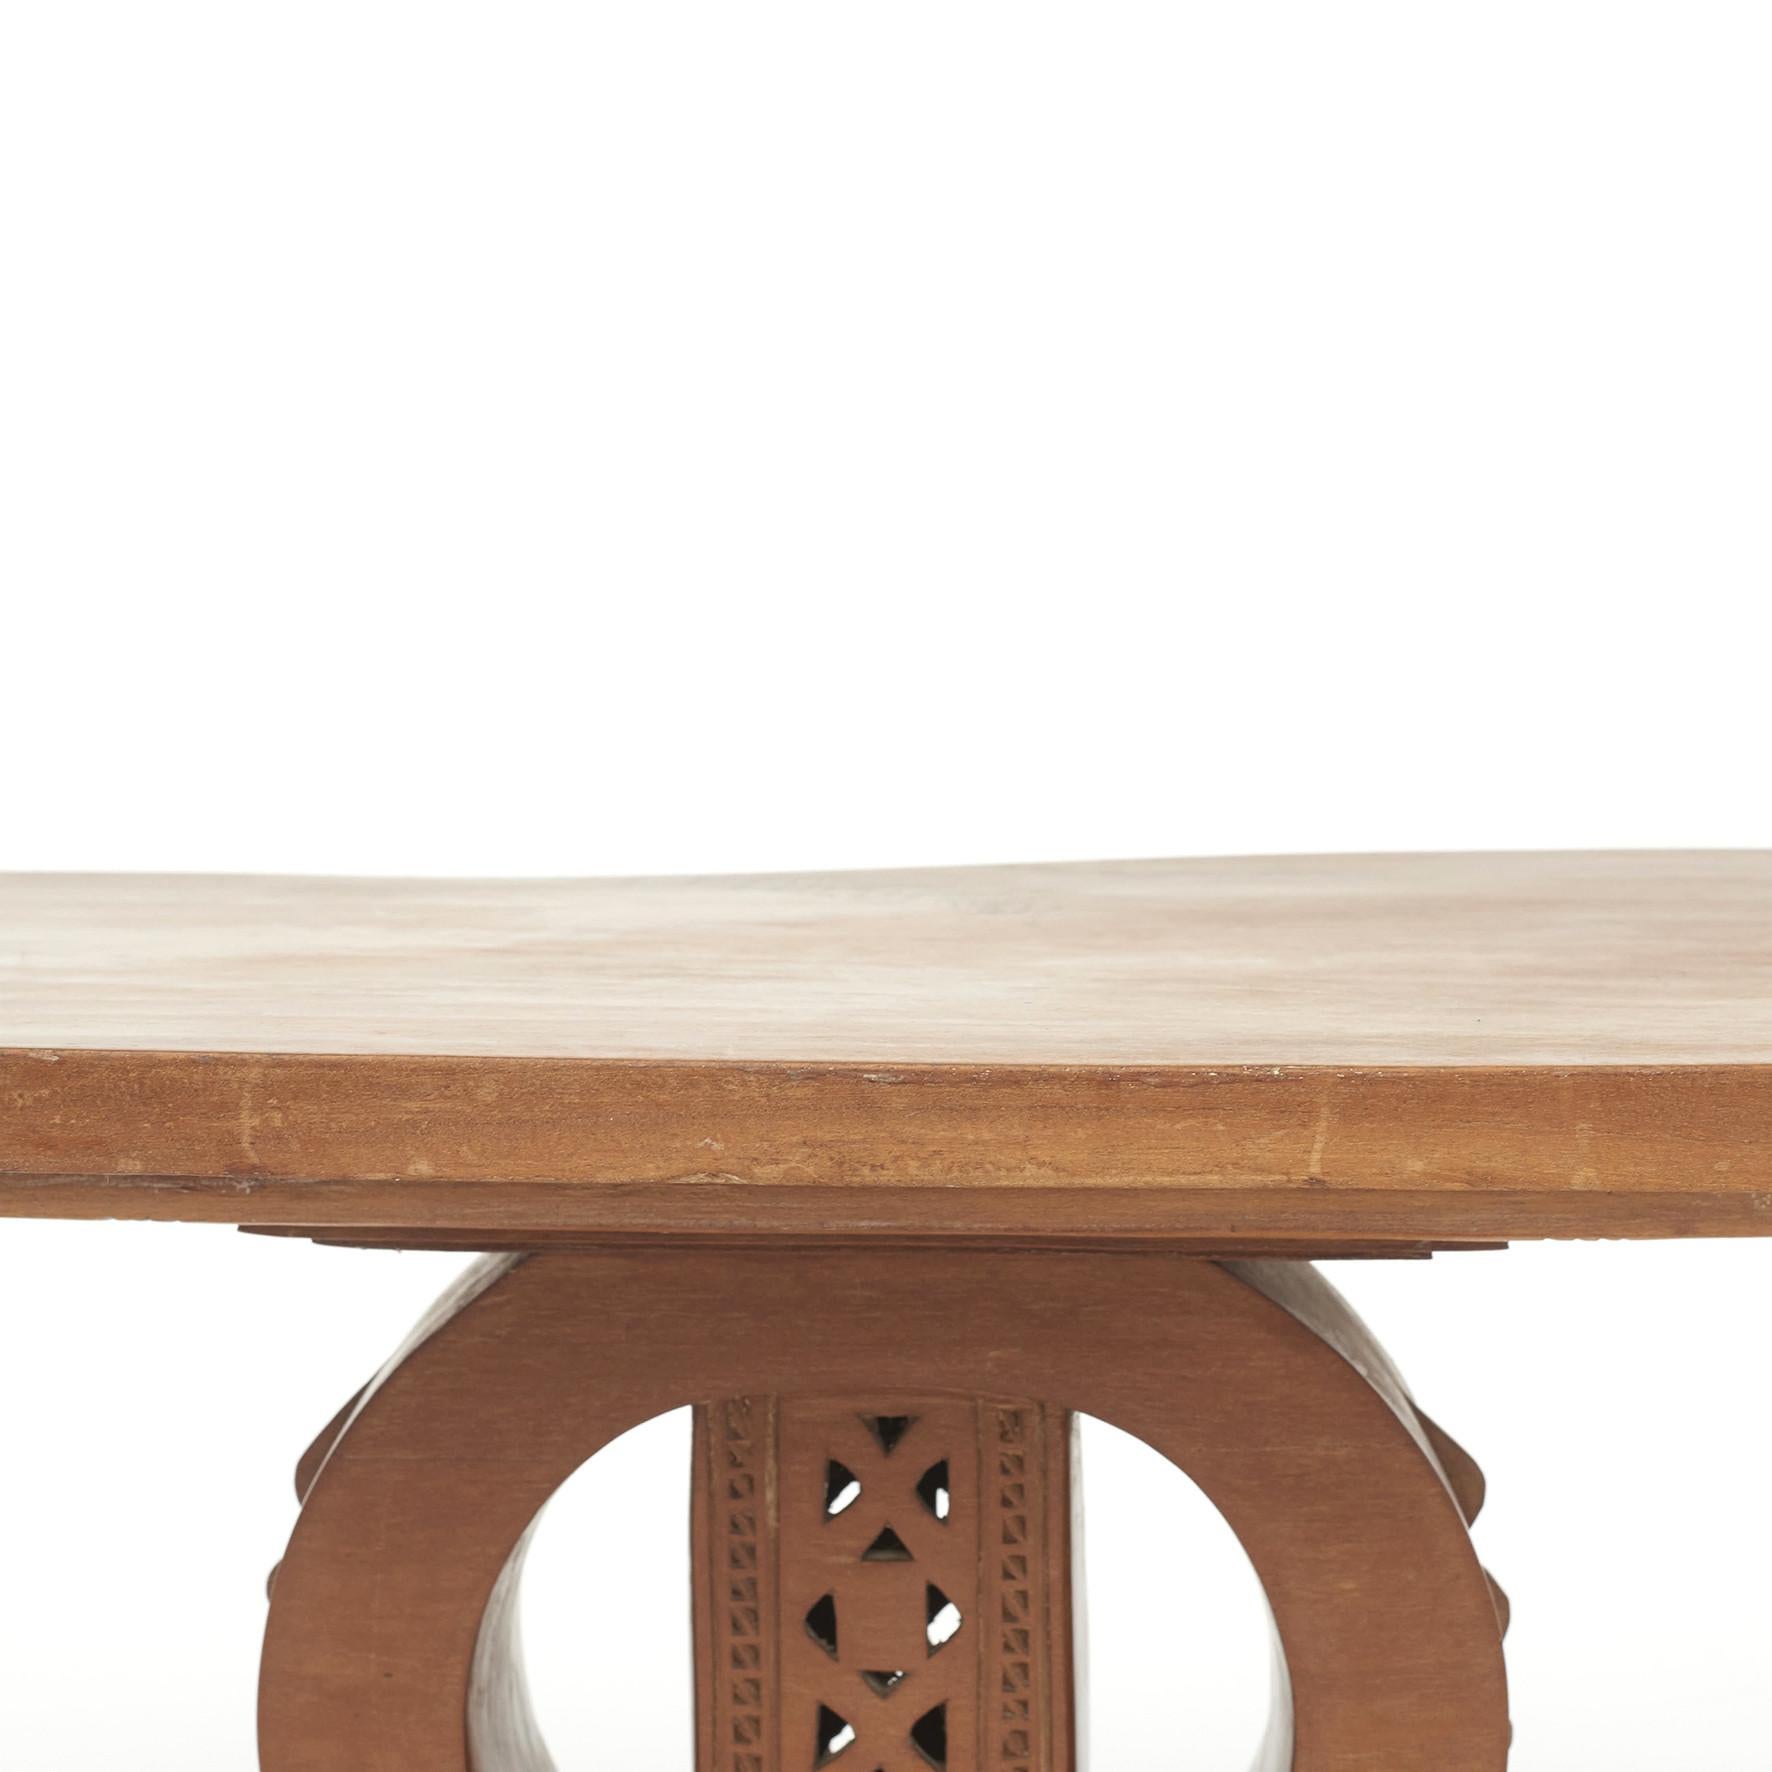 Tribal Ashanti Coffee Table or End Table from Ghana